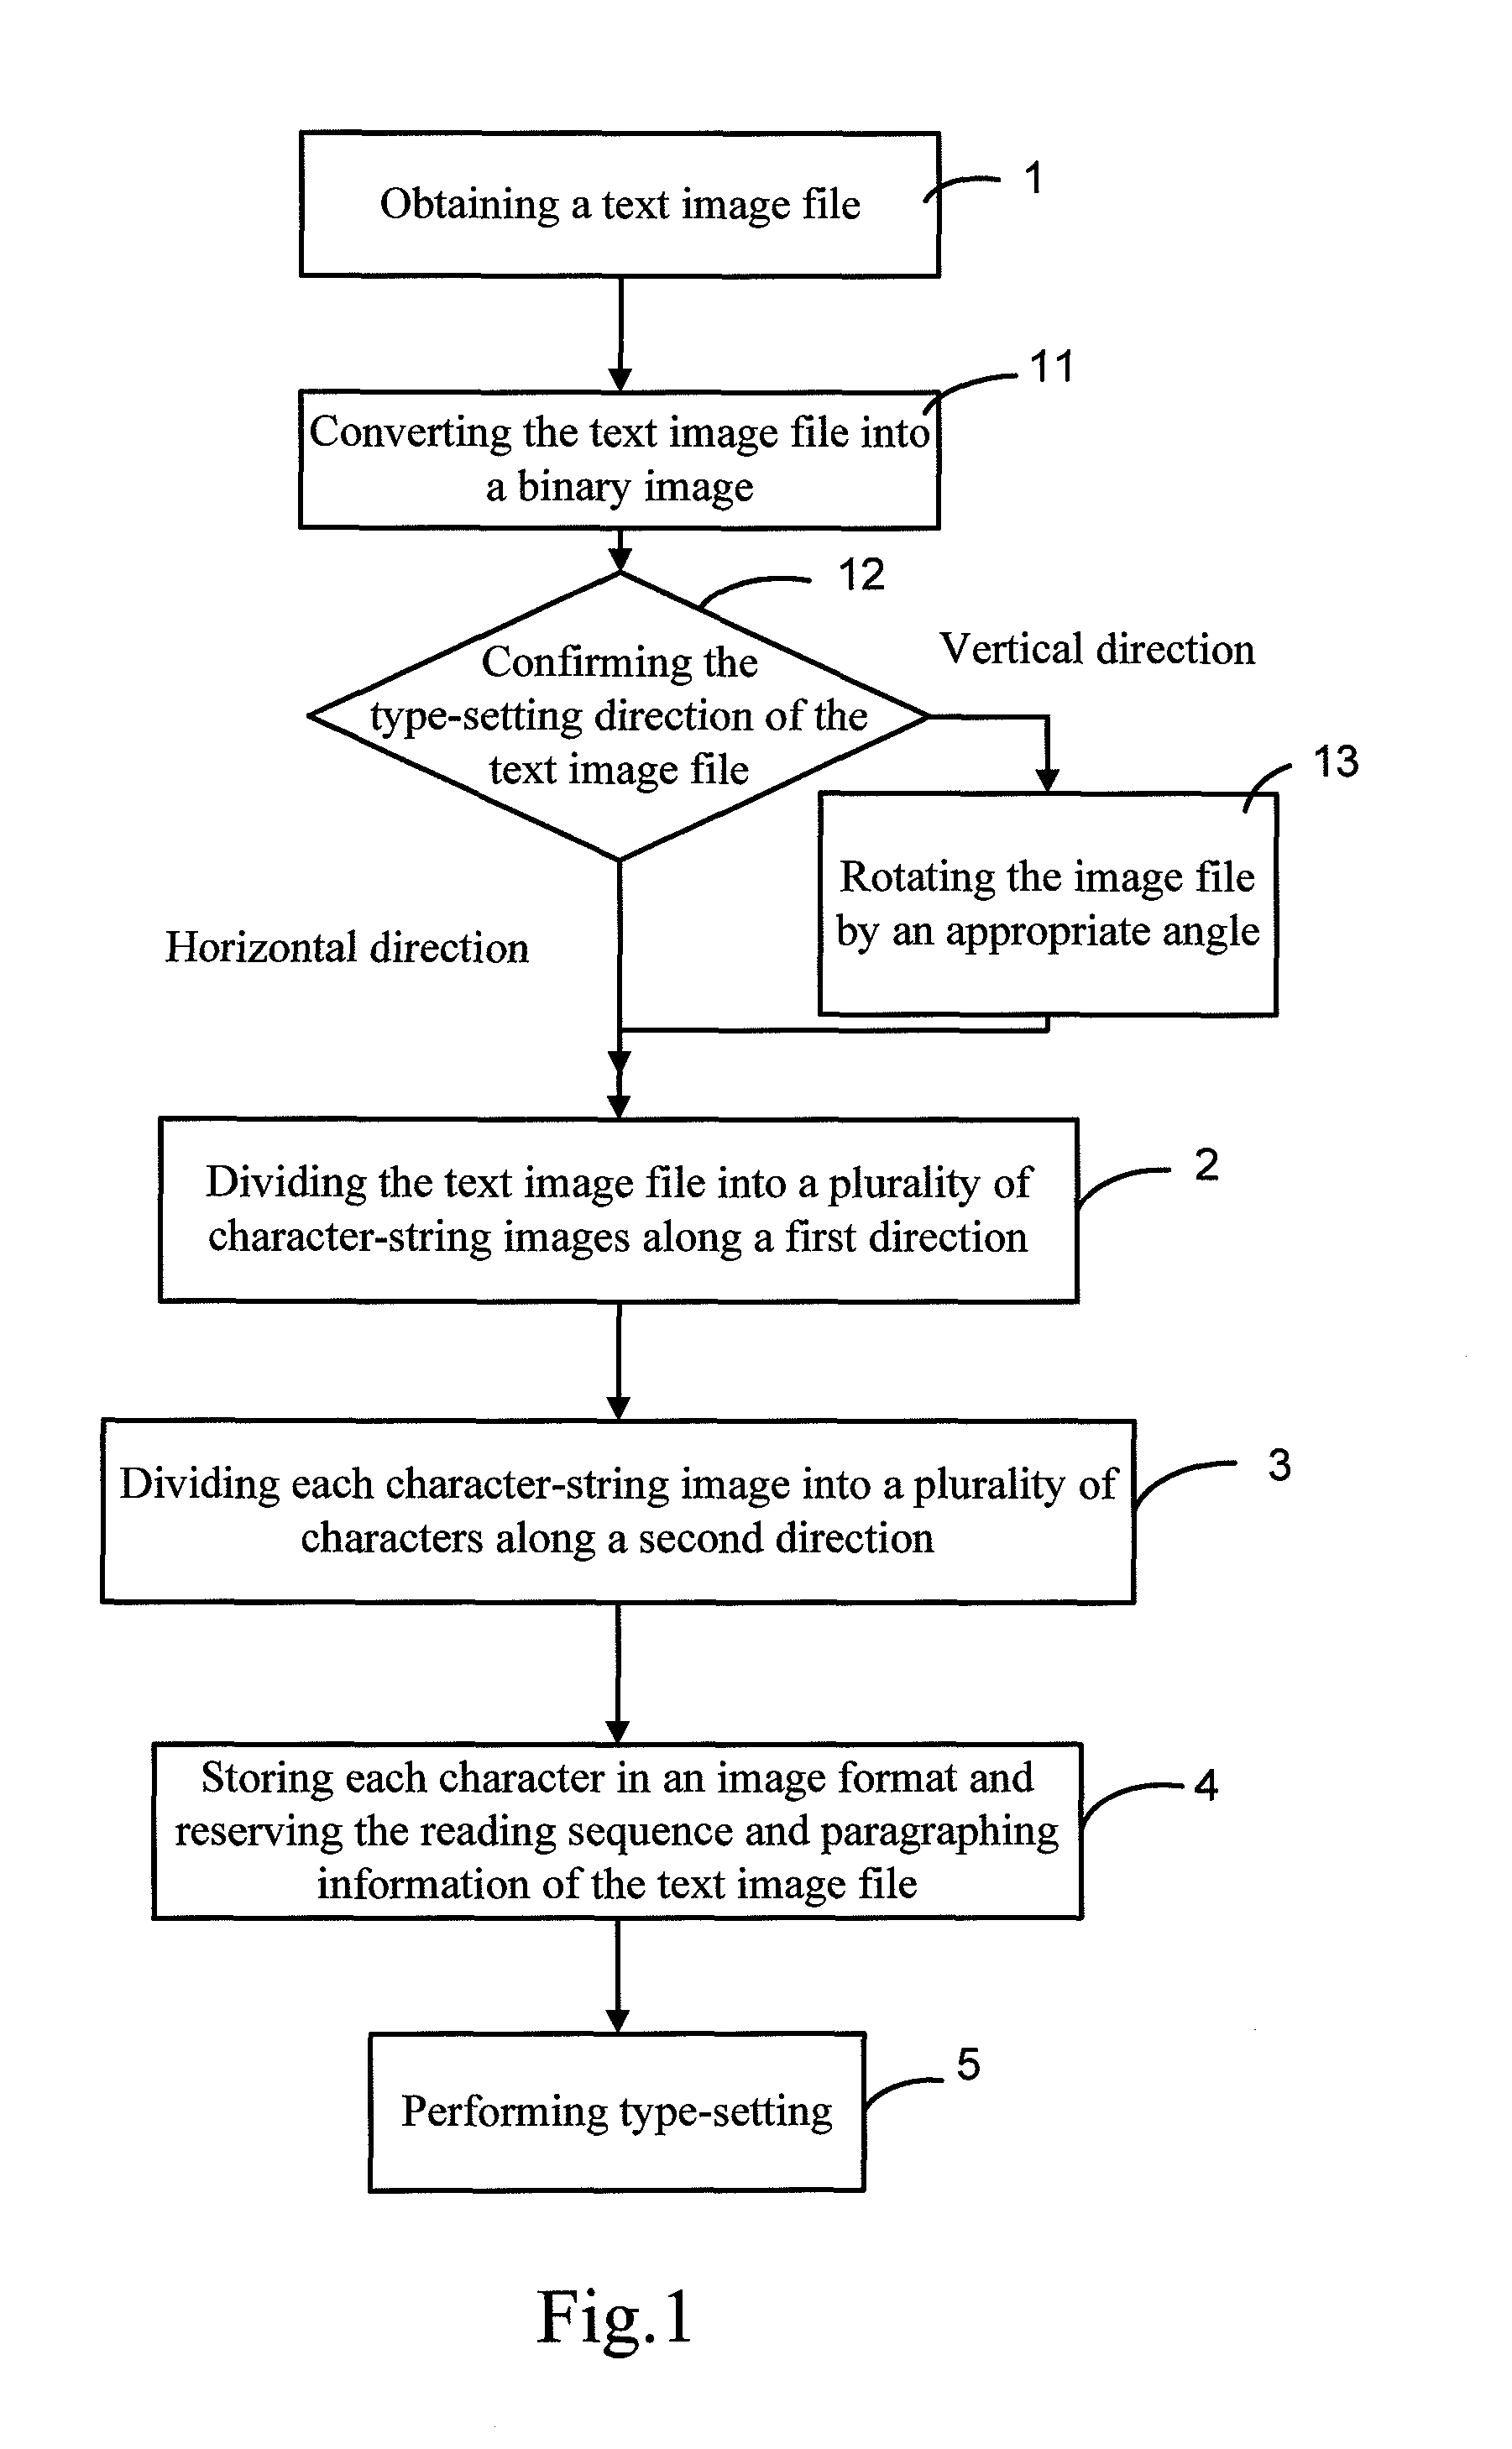 Type-setting method for a text image file